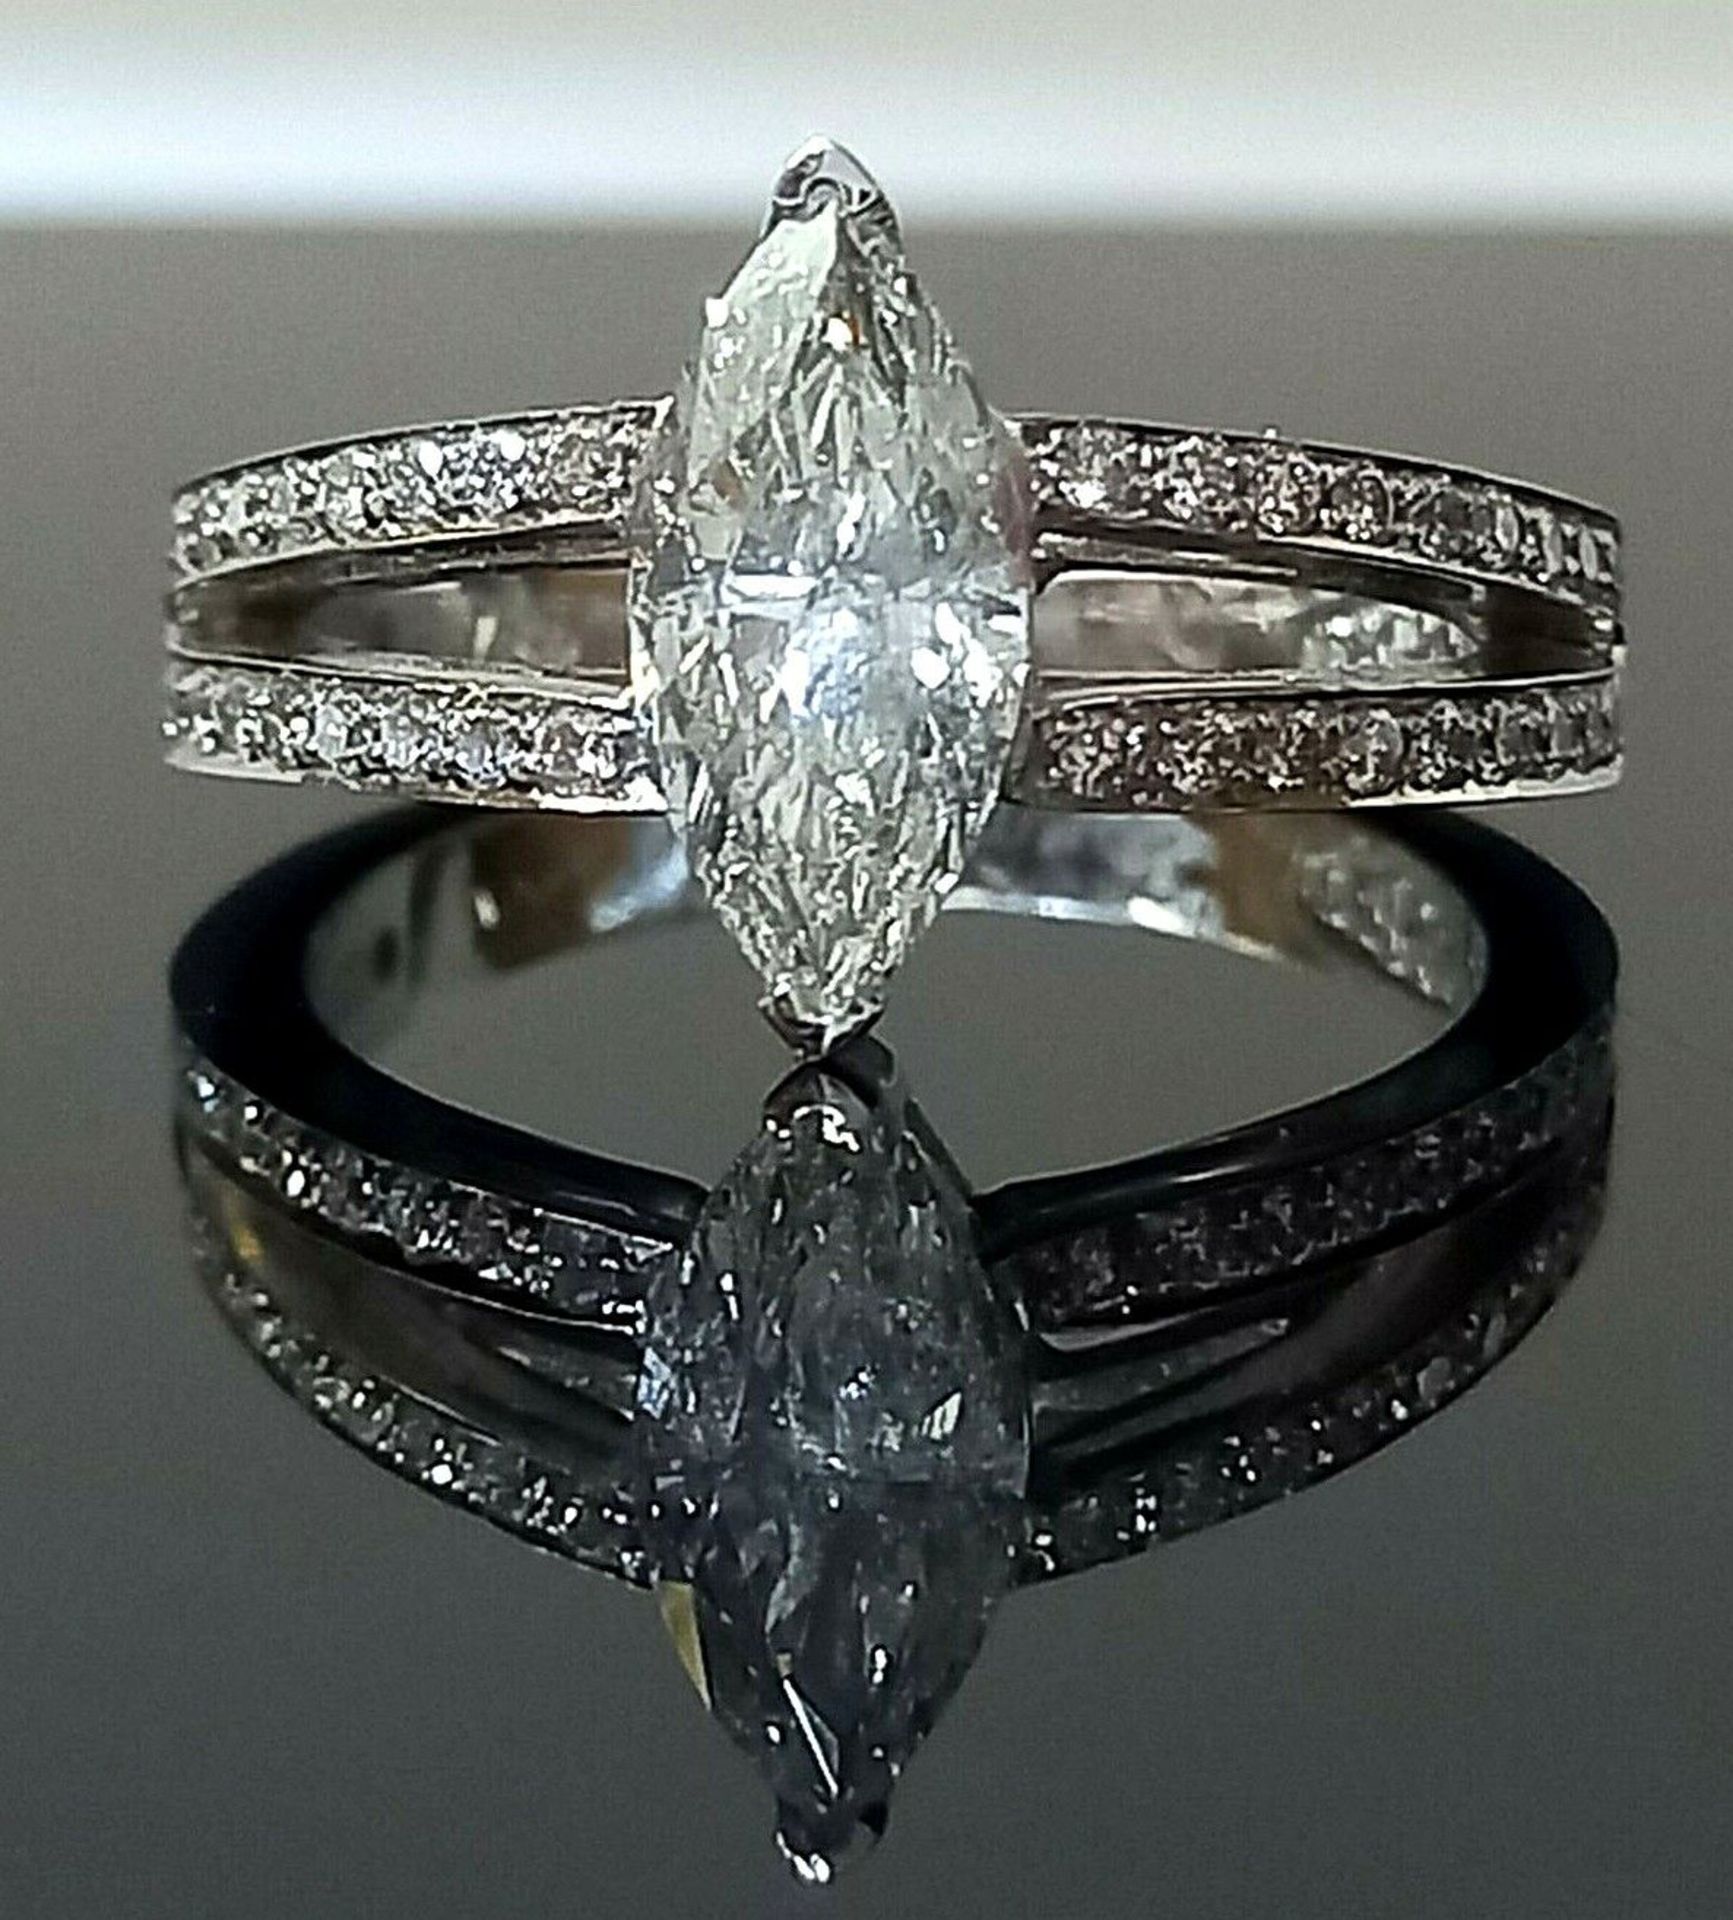 1.41CT MARQUEE DIAMOND ENGAGEMENT RING /DRESS/COCKTAIL + GIFT BOX + VALUATION CERTIFICATE OF £6995 - Image 2 of 4